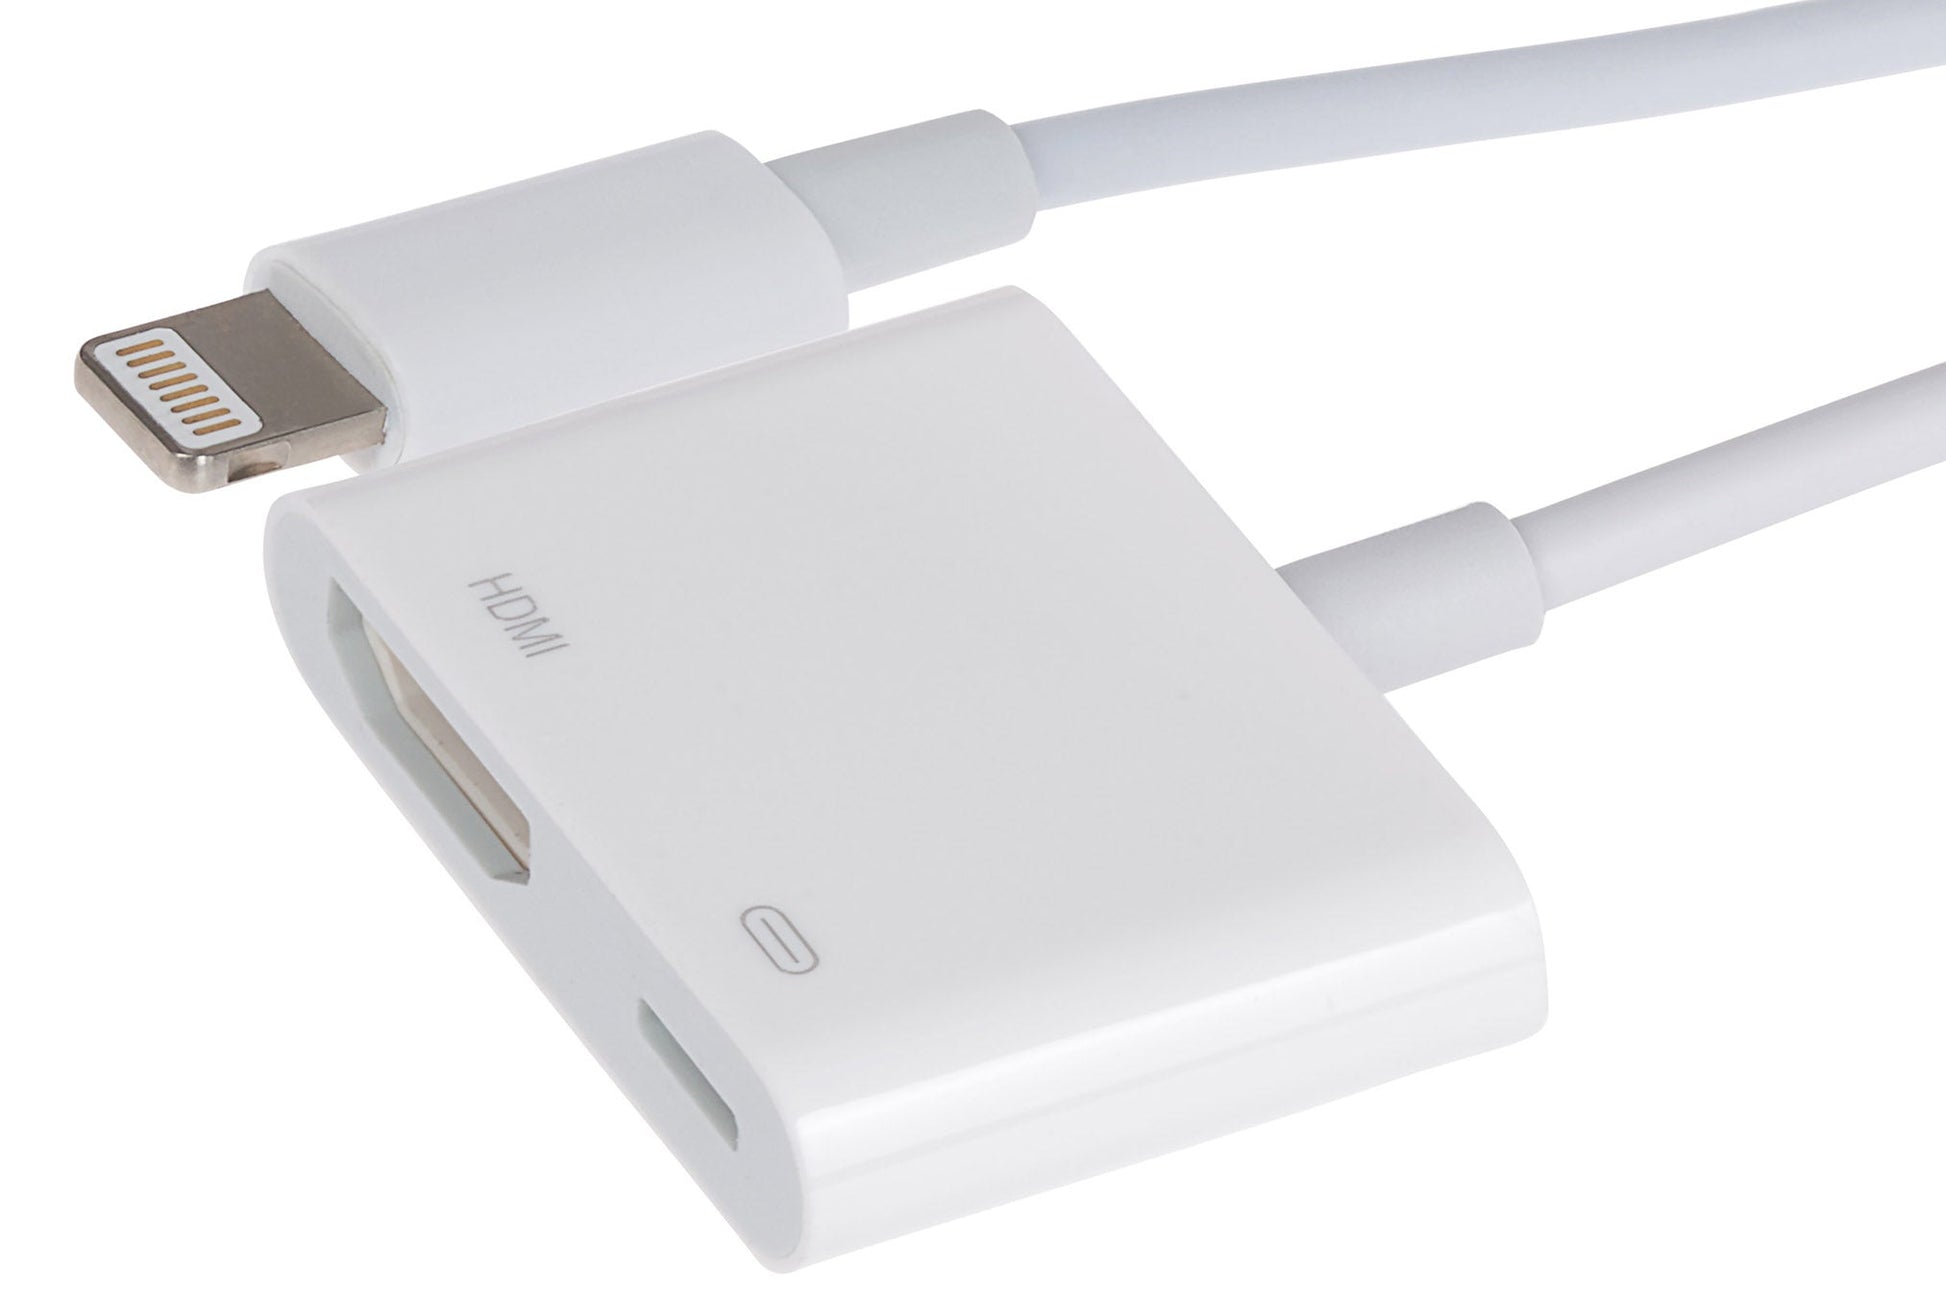 Nikkai Lightning to HDMI / Lightning Charging Port Adapter - White, Chargers & Adapters, Maplin